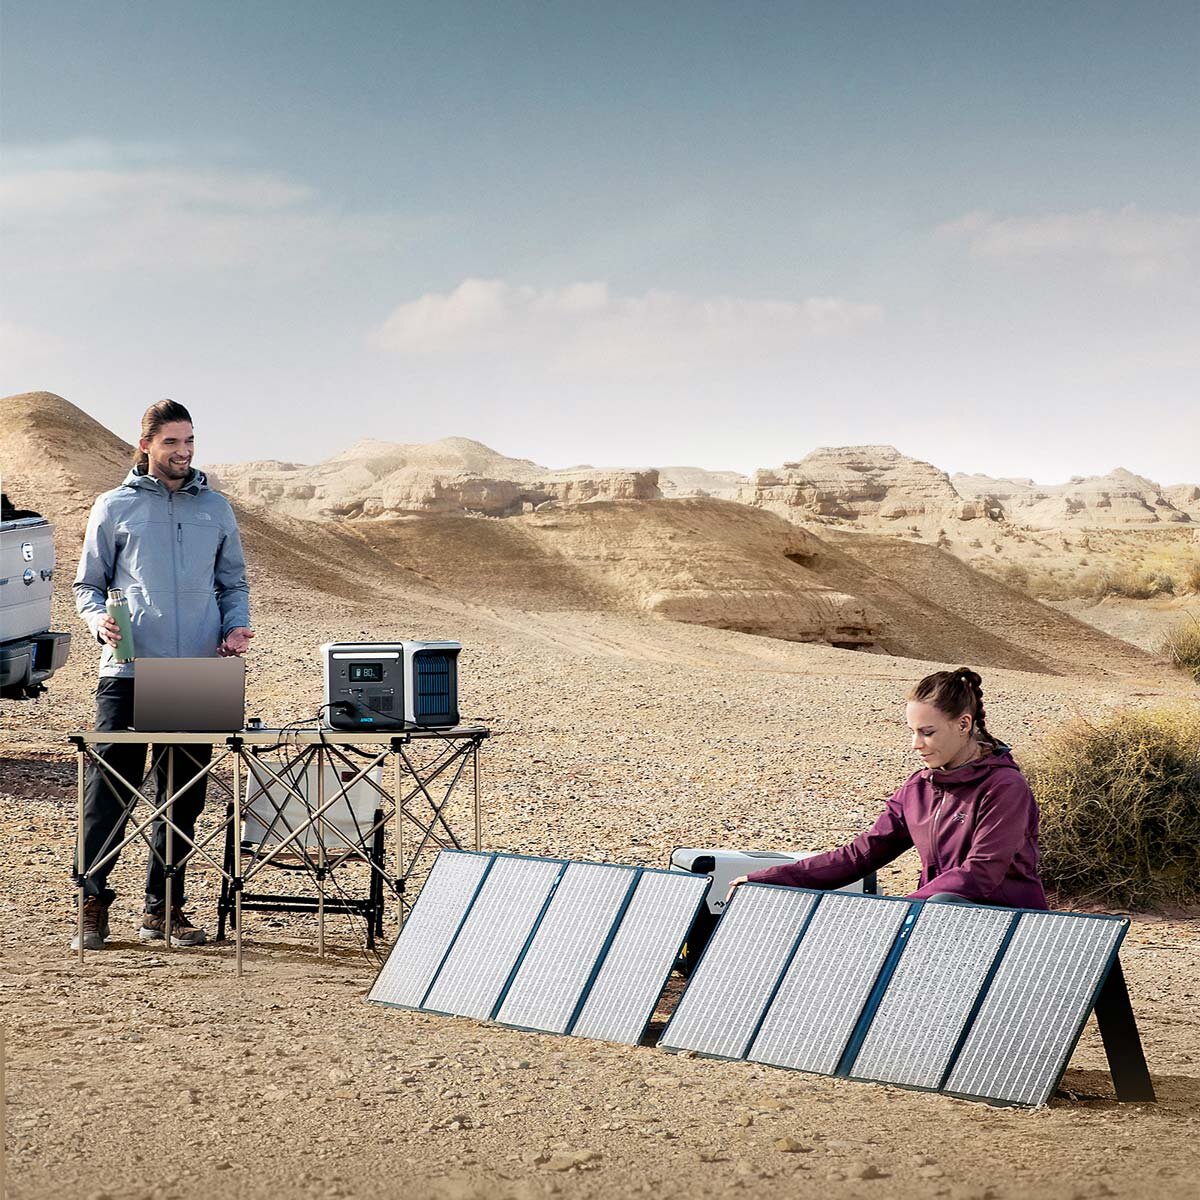 Lifestyle image of solar panels in use in desert